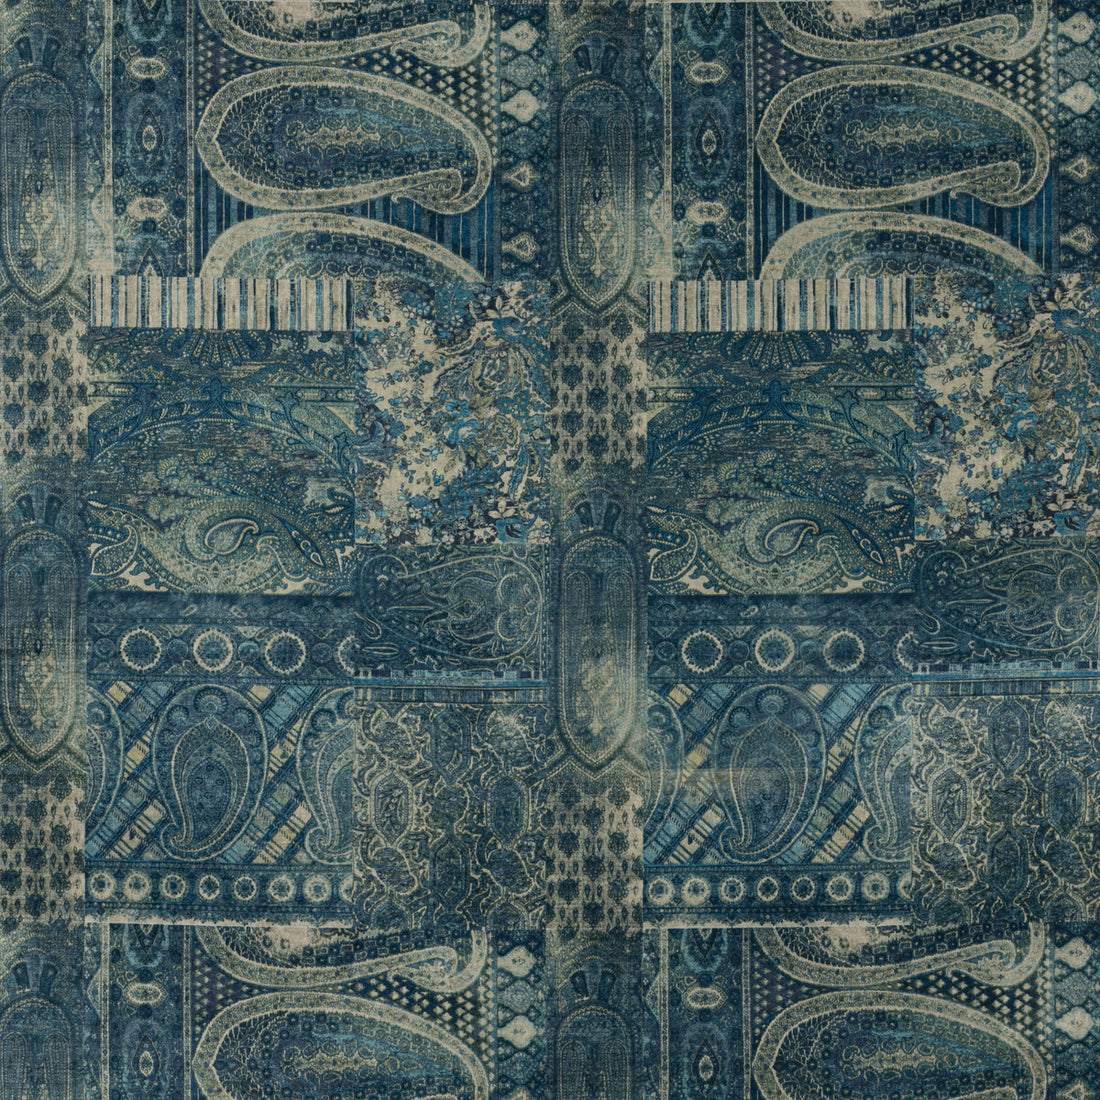 Lomond Velvet fabric in indigo color - pattern FD265.H10.0 - by Mulberry in the Icons Fabrics collection